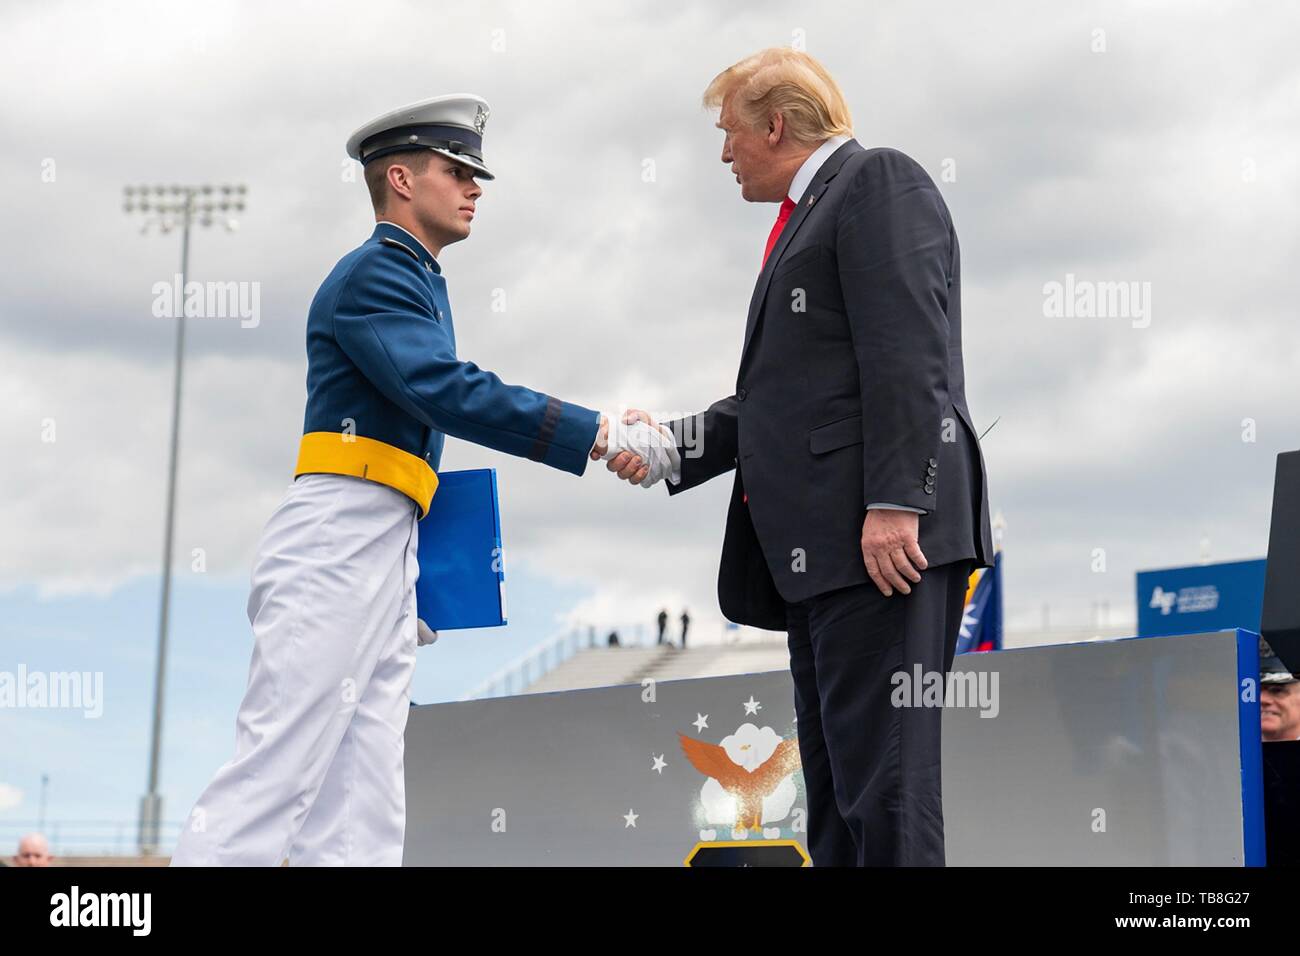 U.S President Donald Trump congratulates cadets during the U.S. Air Force Academy Graduation Ceremony at the USAF Academy Falcon Stadium May 30, 2019 in Colorado Springs, Colorado. Credit: Planetpix/Alamy Live News Stock Photo